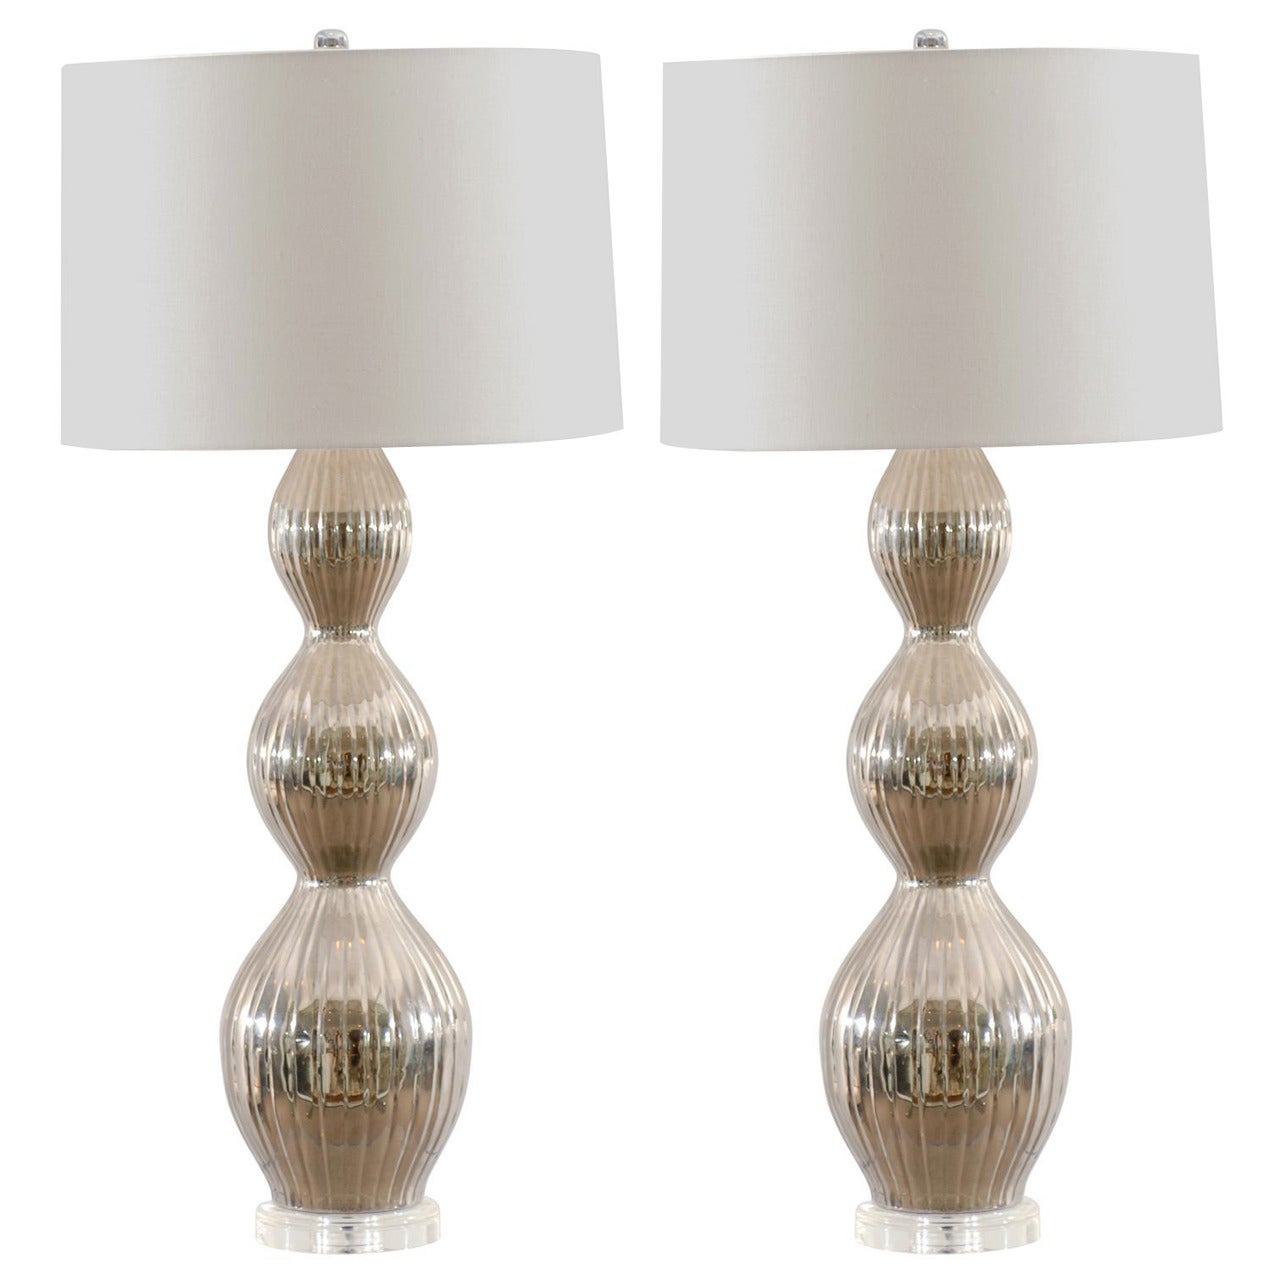 Pair of Mid-Century Lamps on Lucite Bases